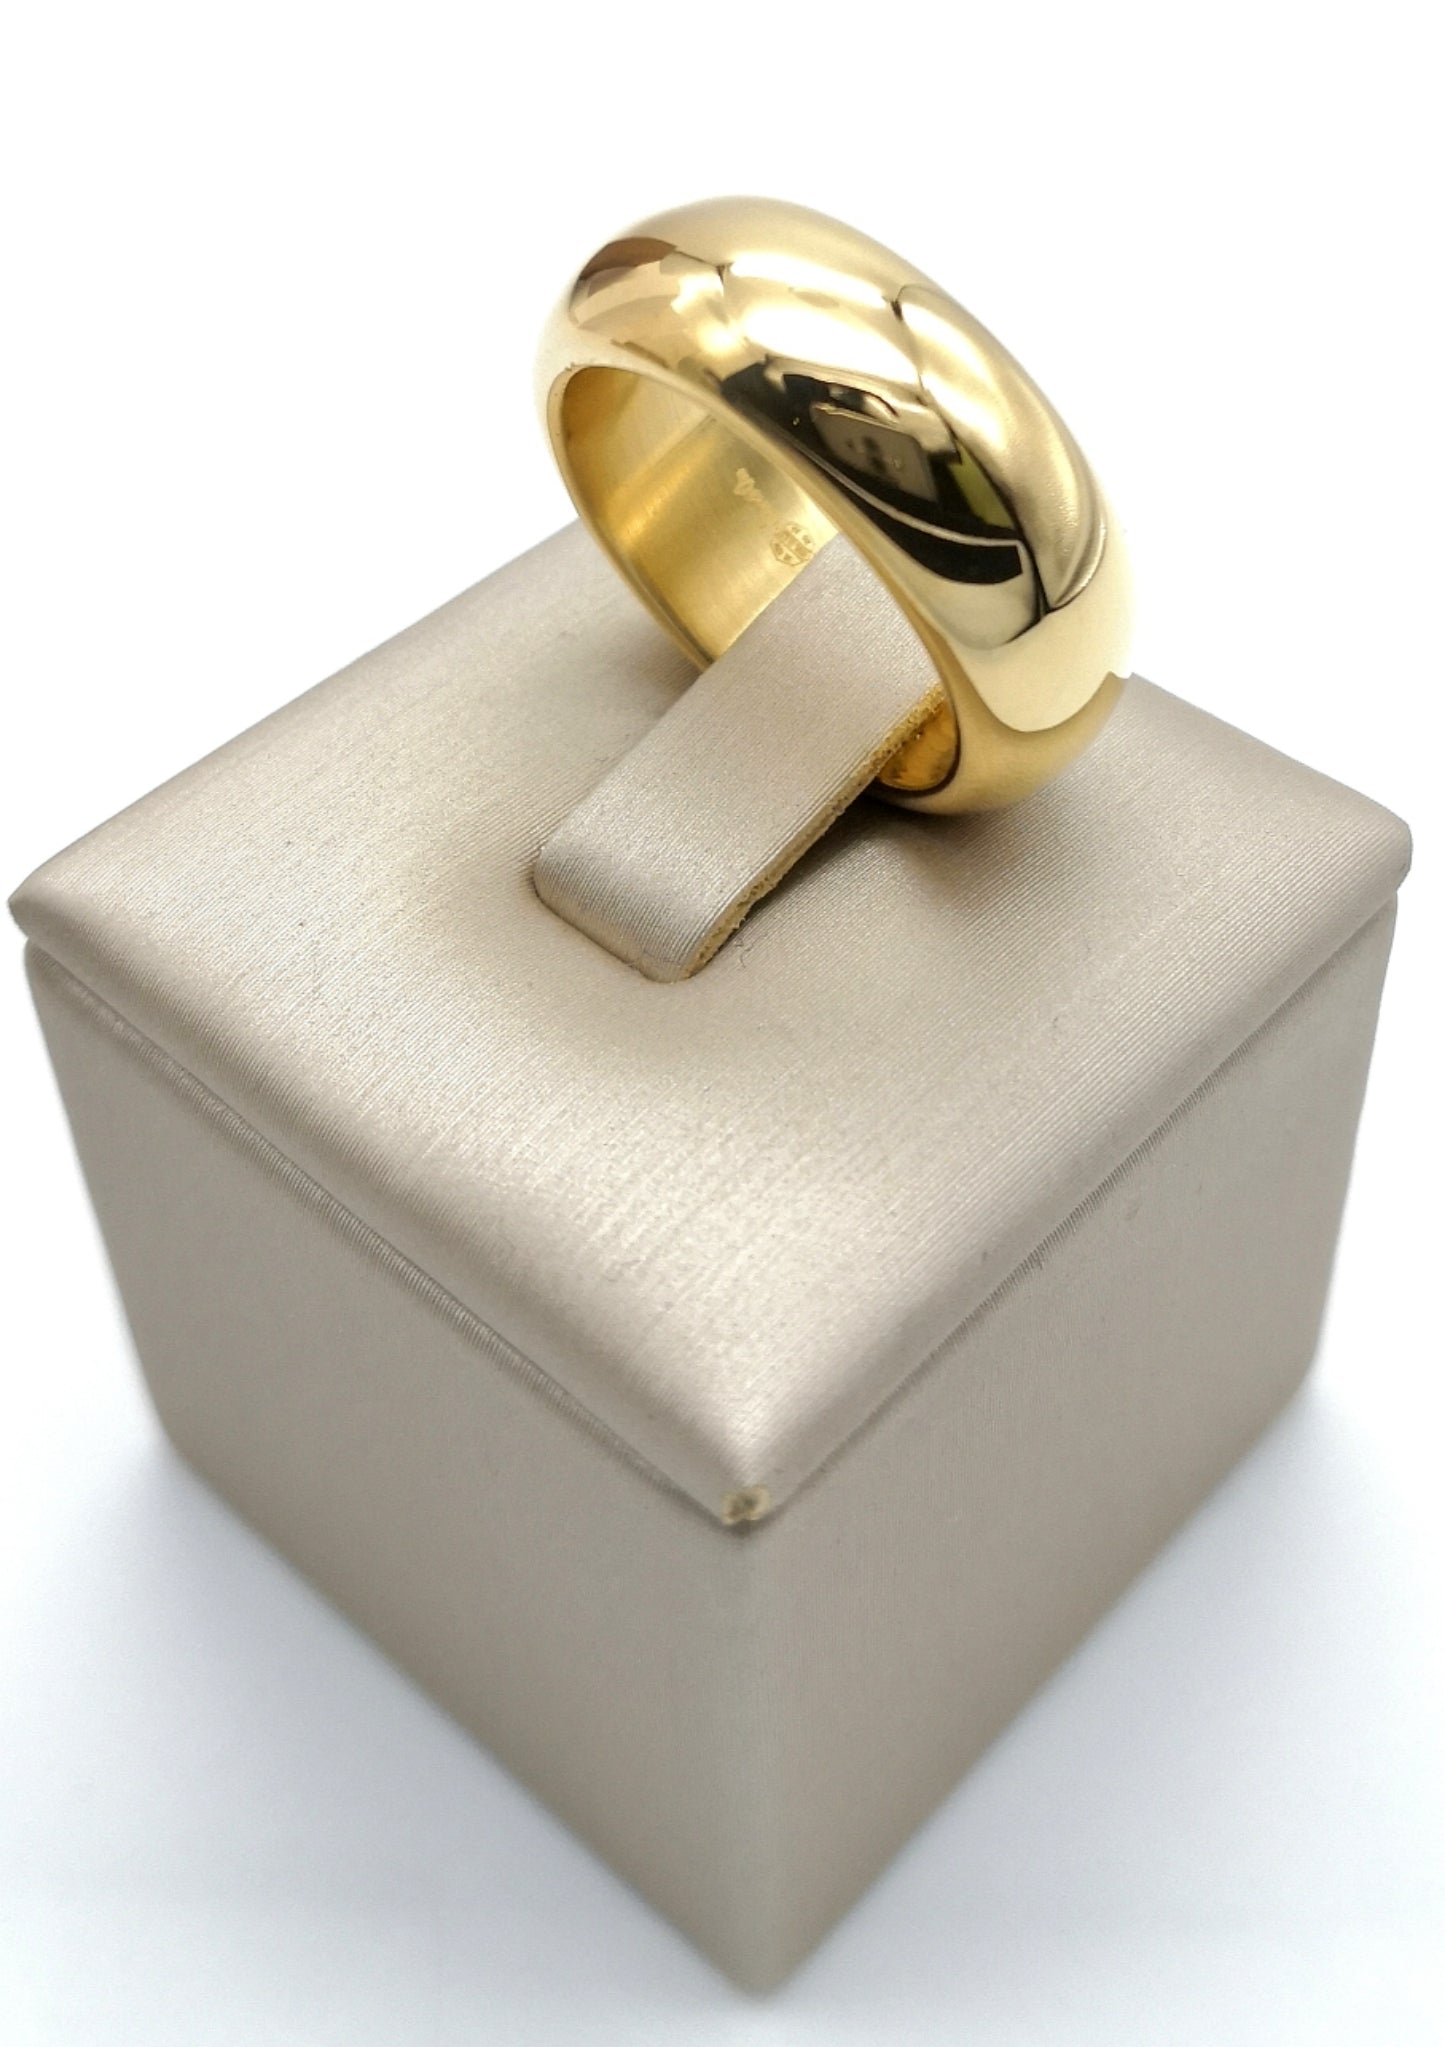 Soave gold - Yellow gold ring with rounded band